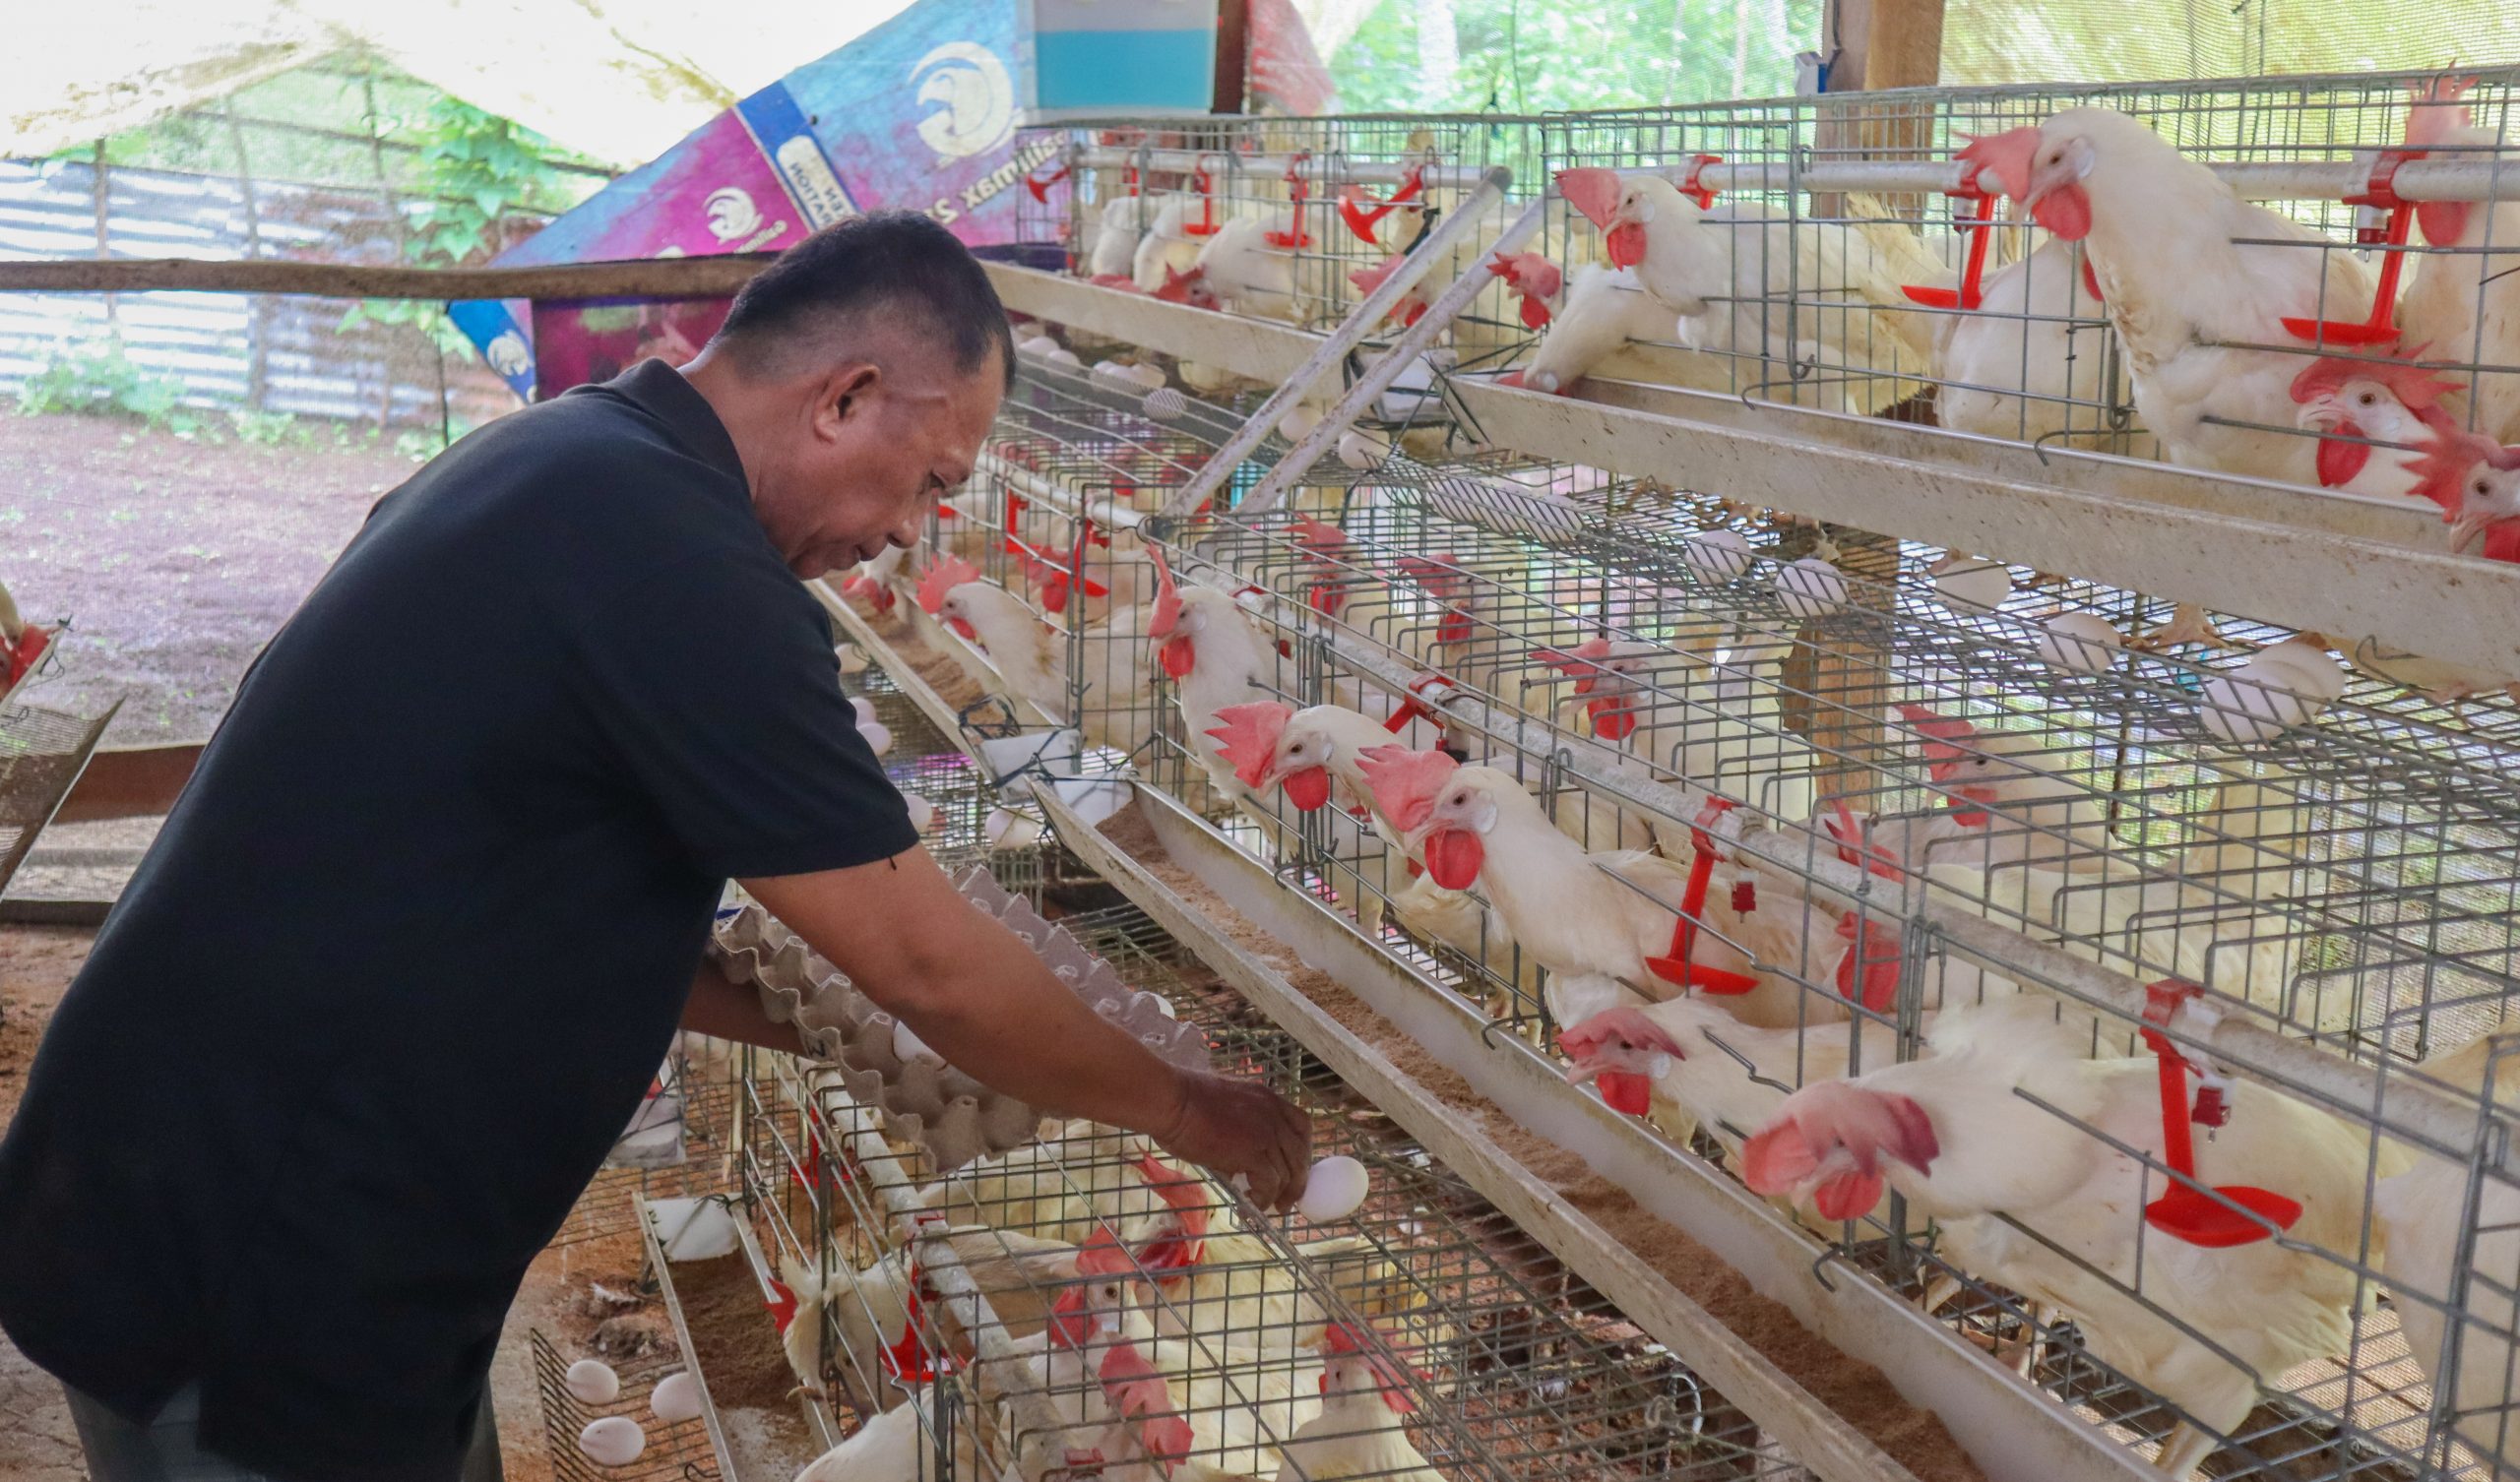 Siargao farmers engage in rice retailing business from income gained thru SAAD-funded poultry project